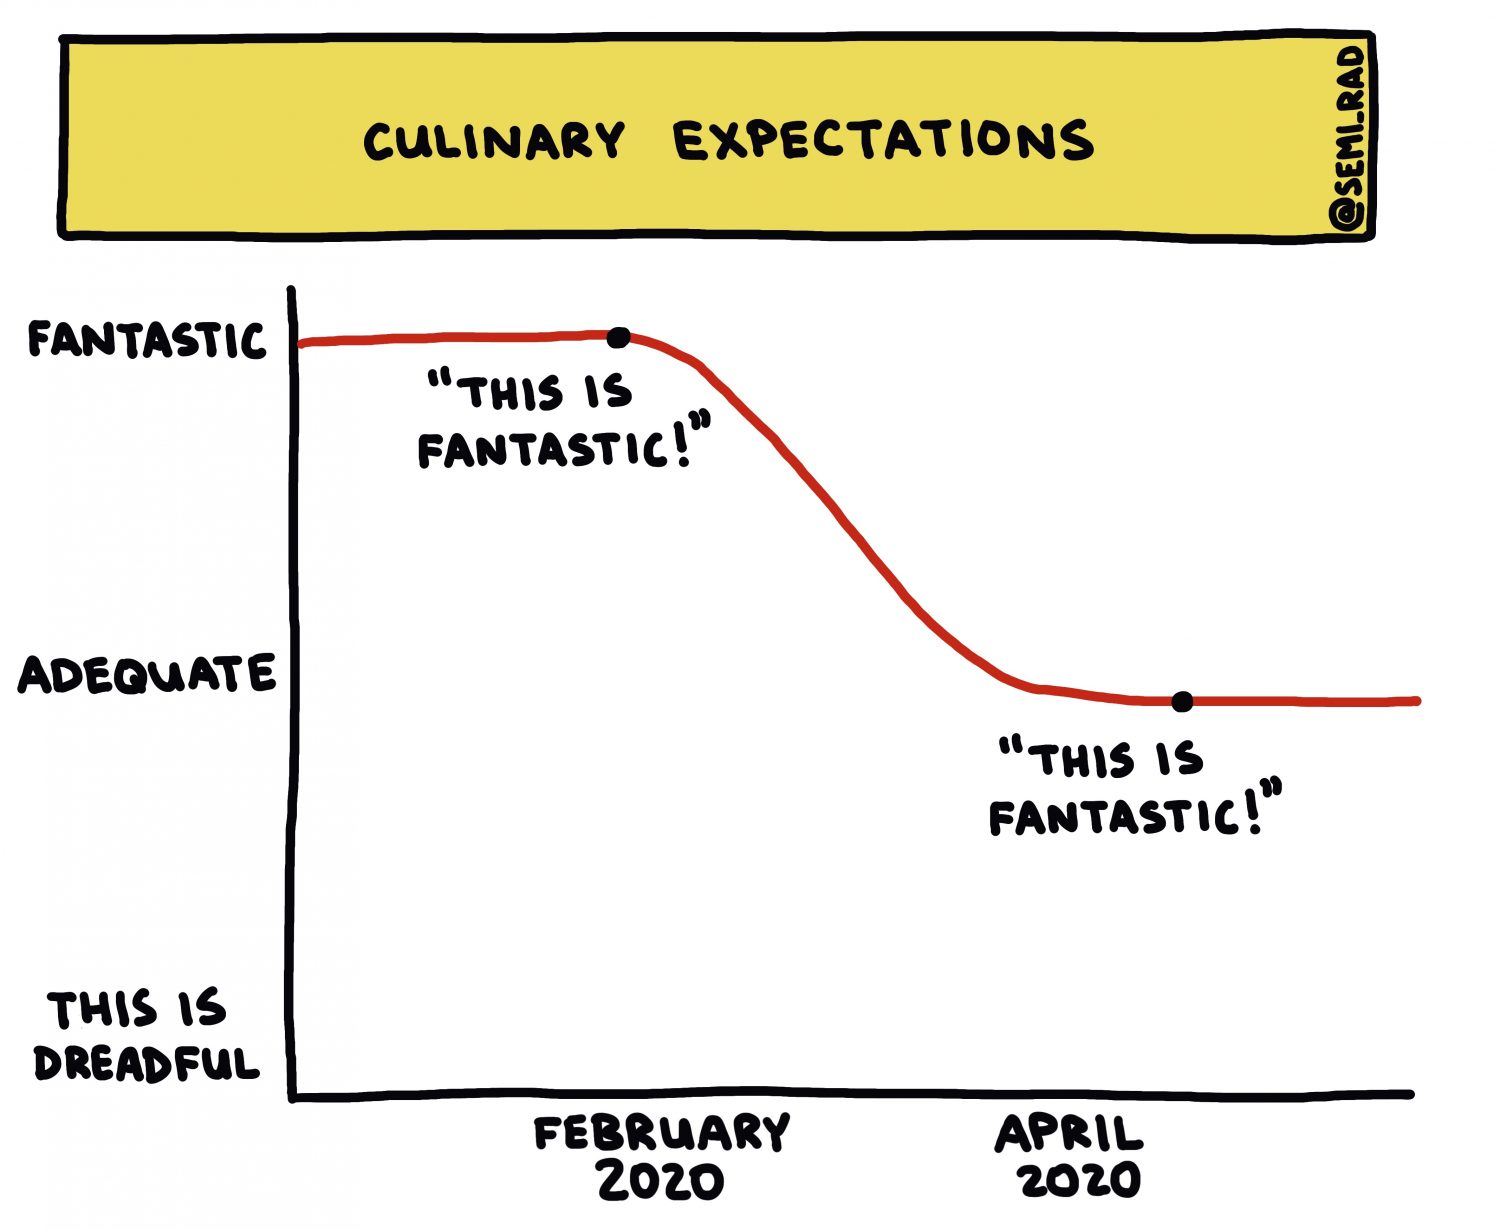 Culinary Expectations, February 2020-April 2020